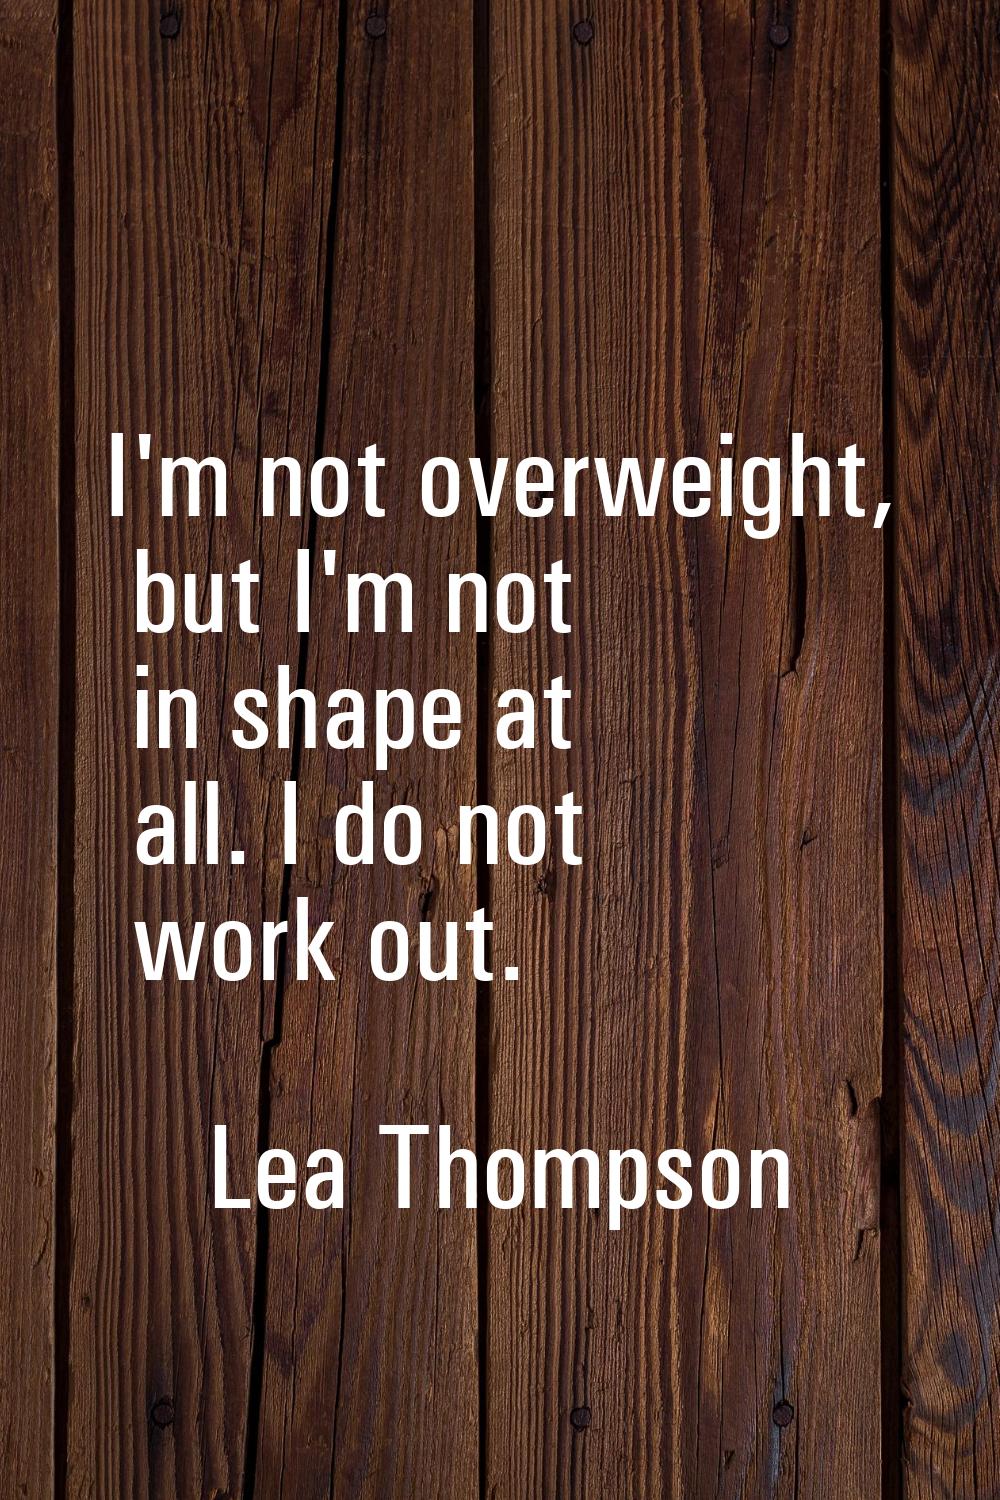 I'm not overweight, but I'm not in shape at all. I do not work out.